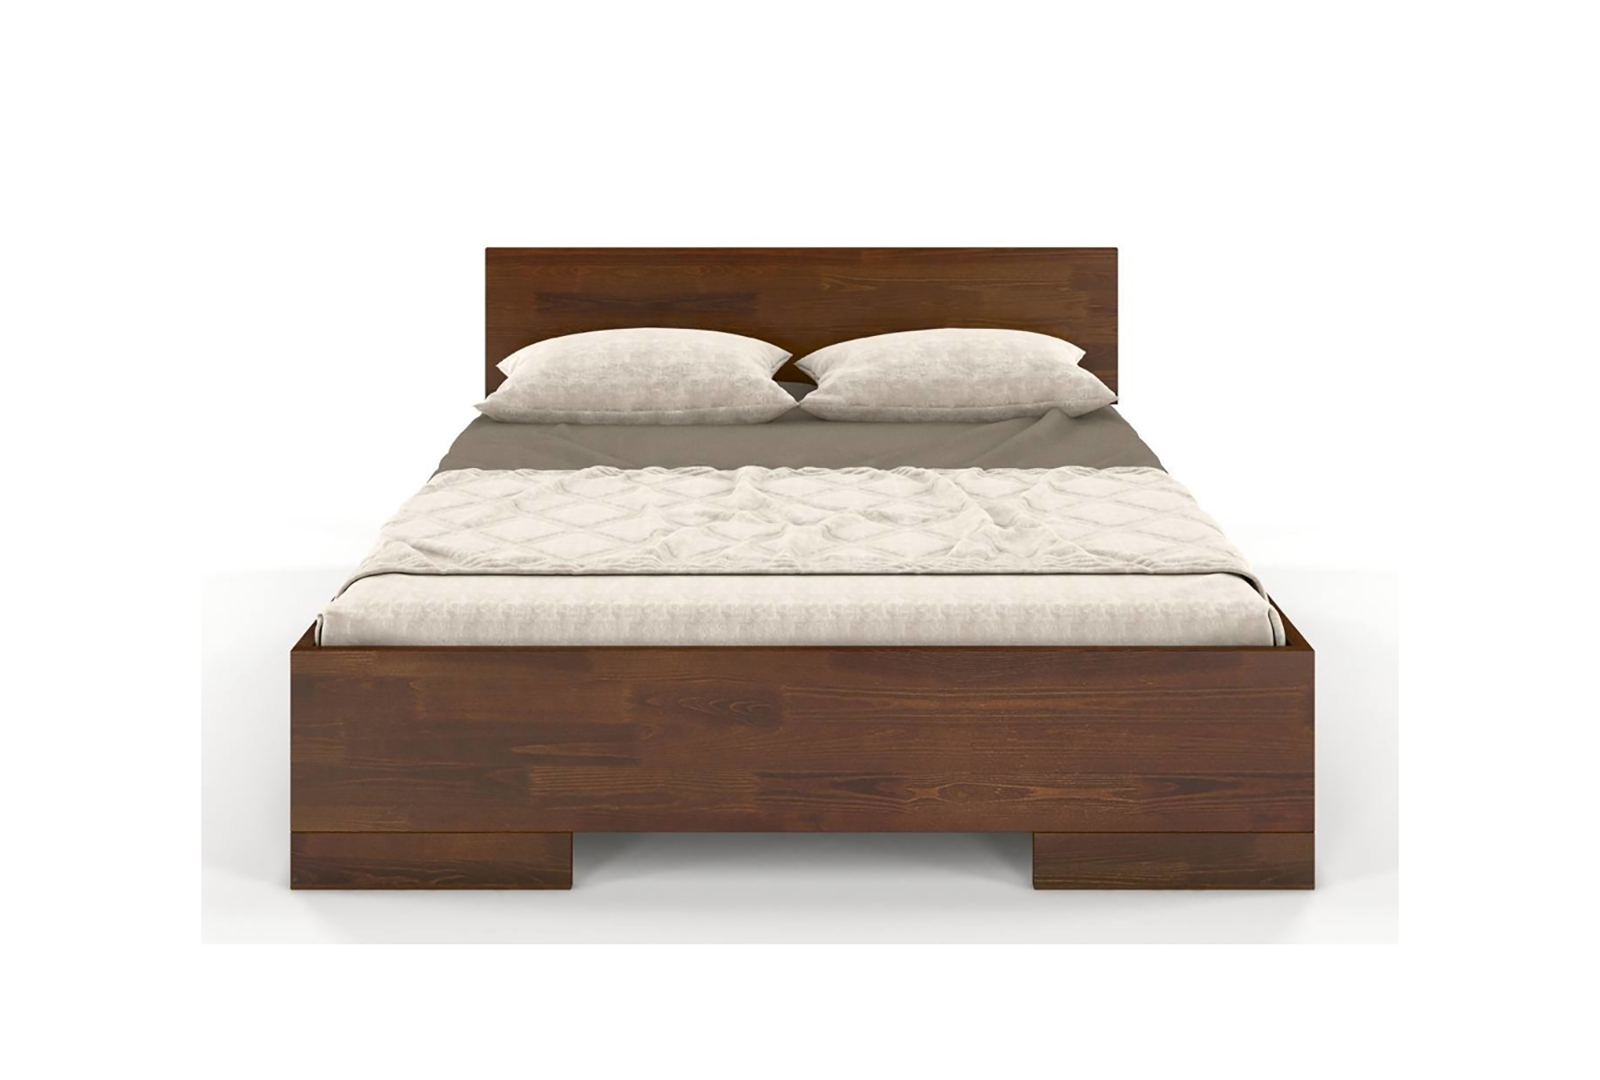 WOODEN PINE BED WITH A BOX FOR BEDDING SKANDICA SPECTRUM MAXI AND ST